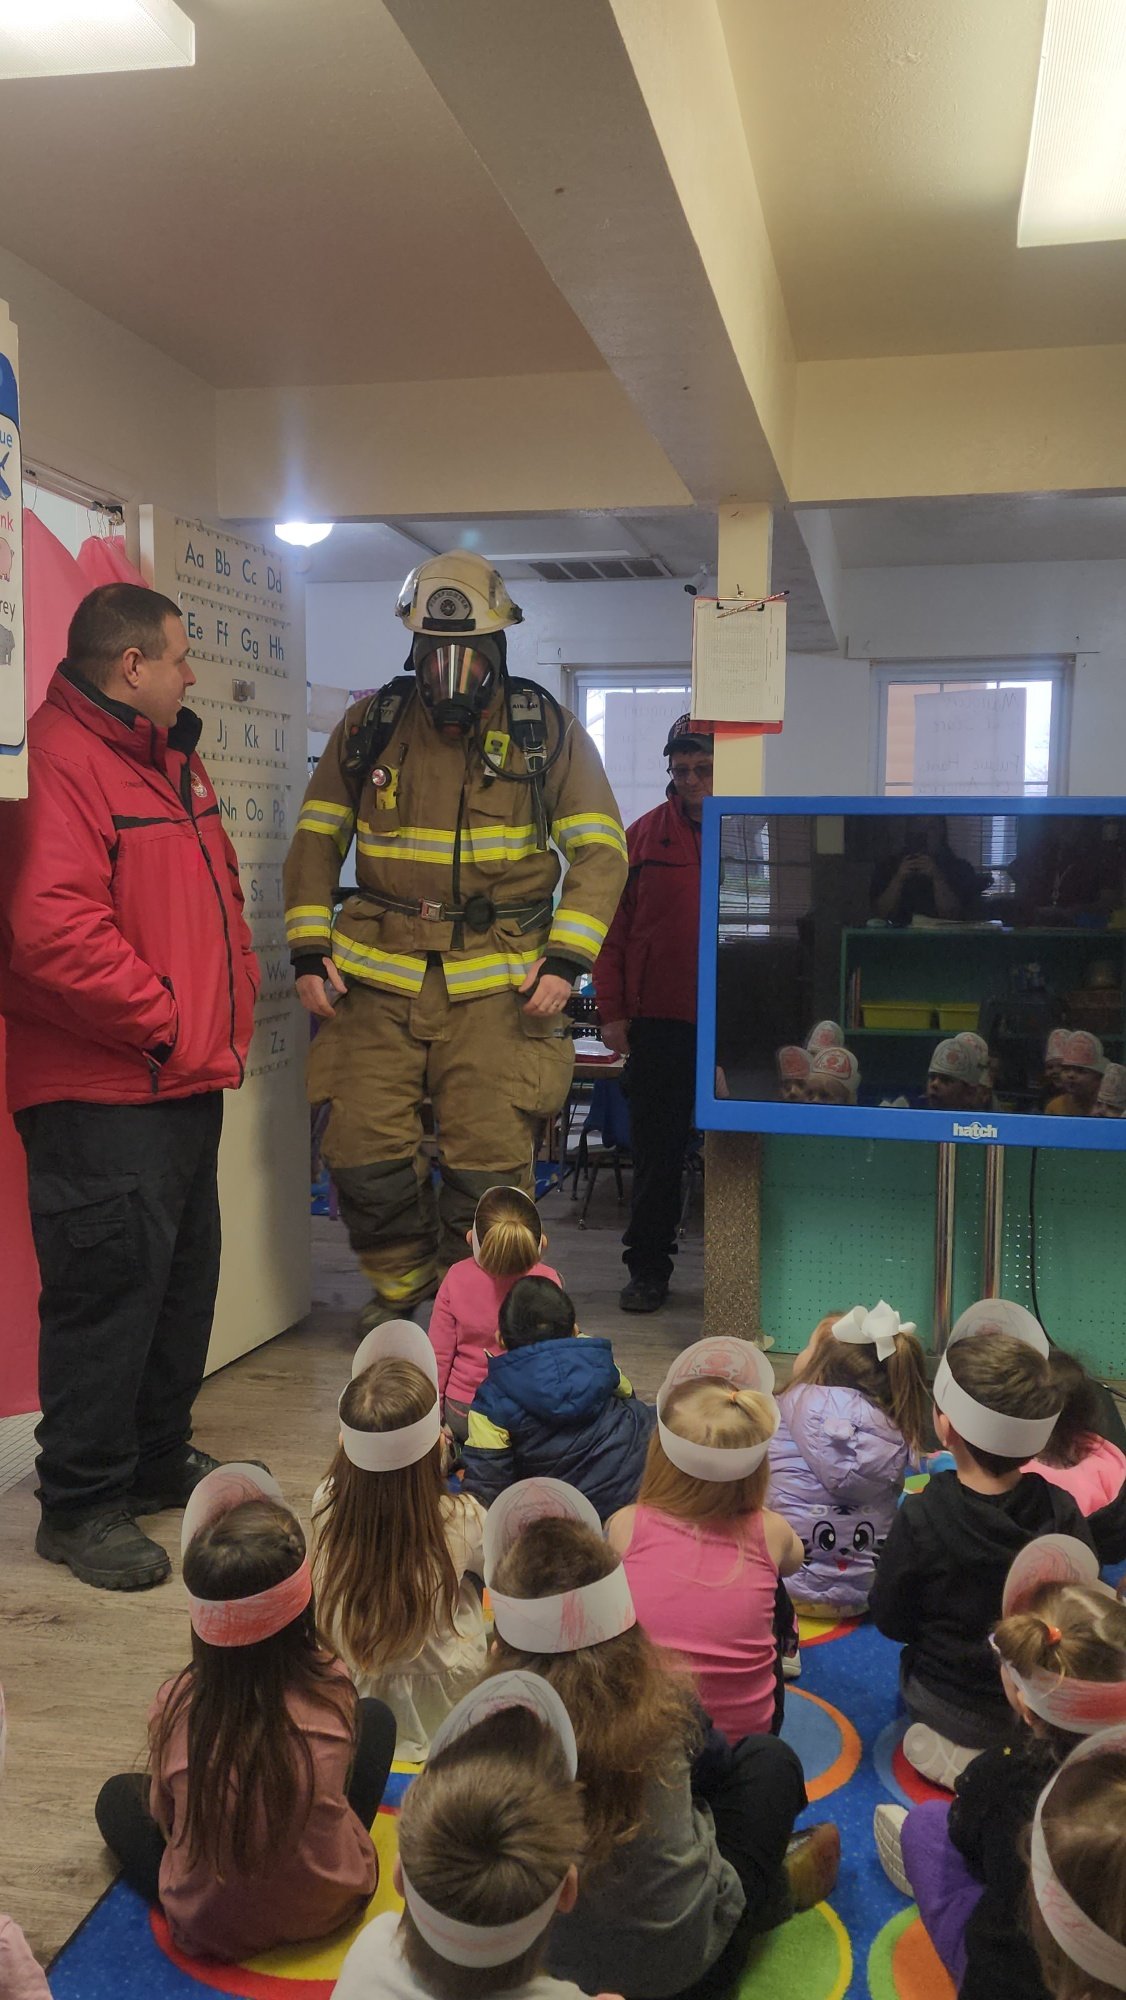  The Mangum Fire Department made a visit to Mangum Head Start on Friday to talk to the children about fire safety and show their truck. 